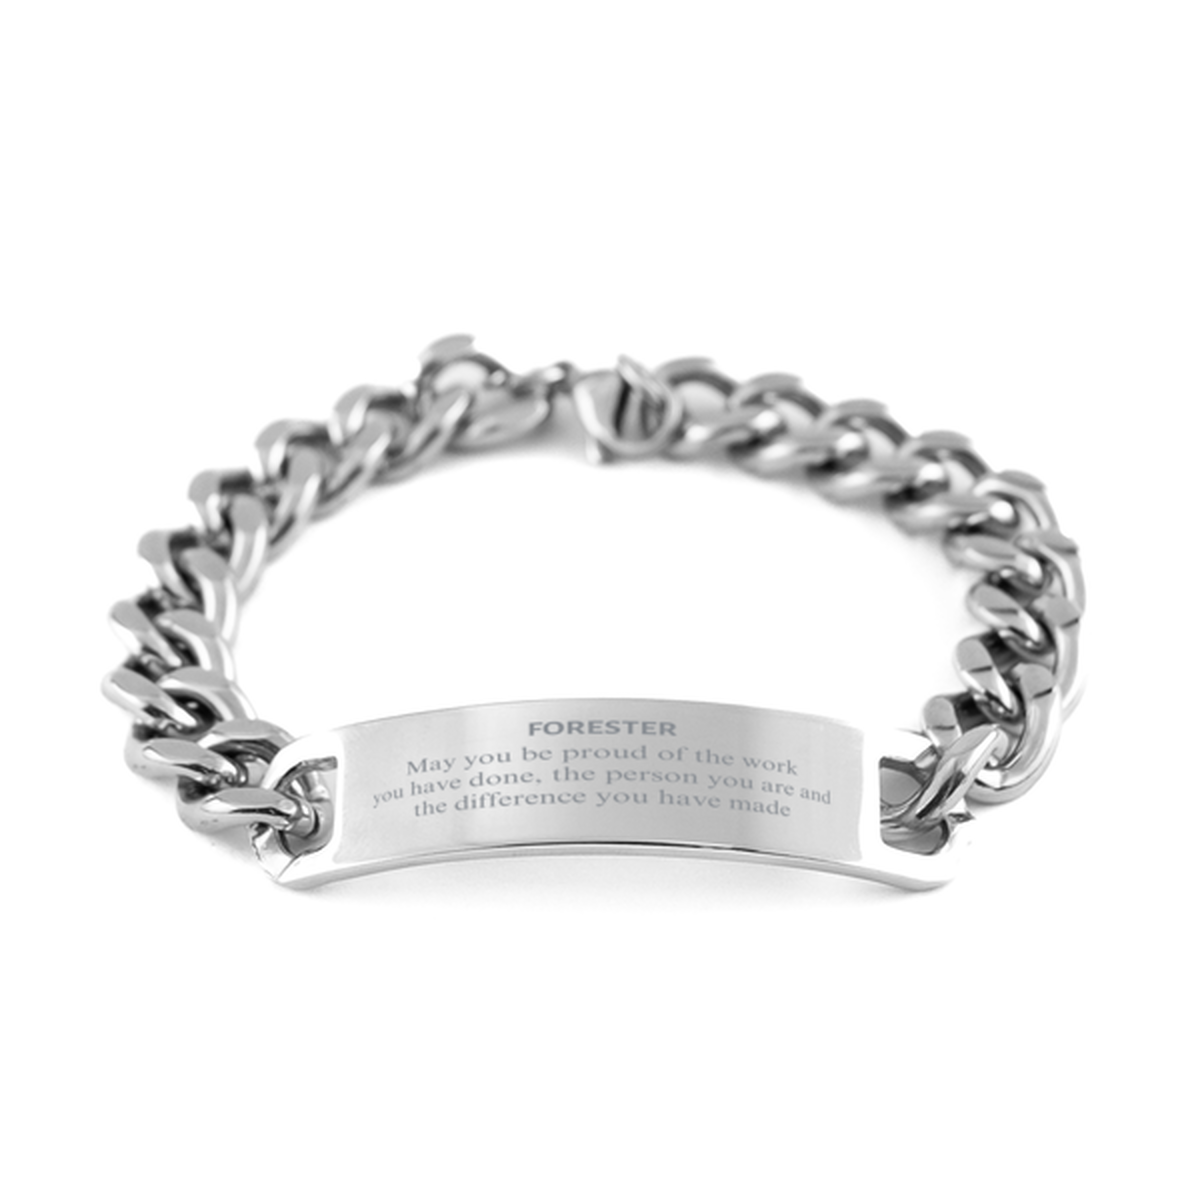 Forester May you be proud of the work you have done, Retirement Forester Cuban Chain Stainless Steel Bracelet for Colleague Appreciation Gifts Amazing for Forester